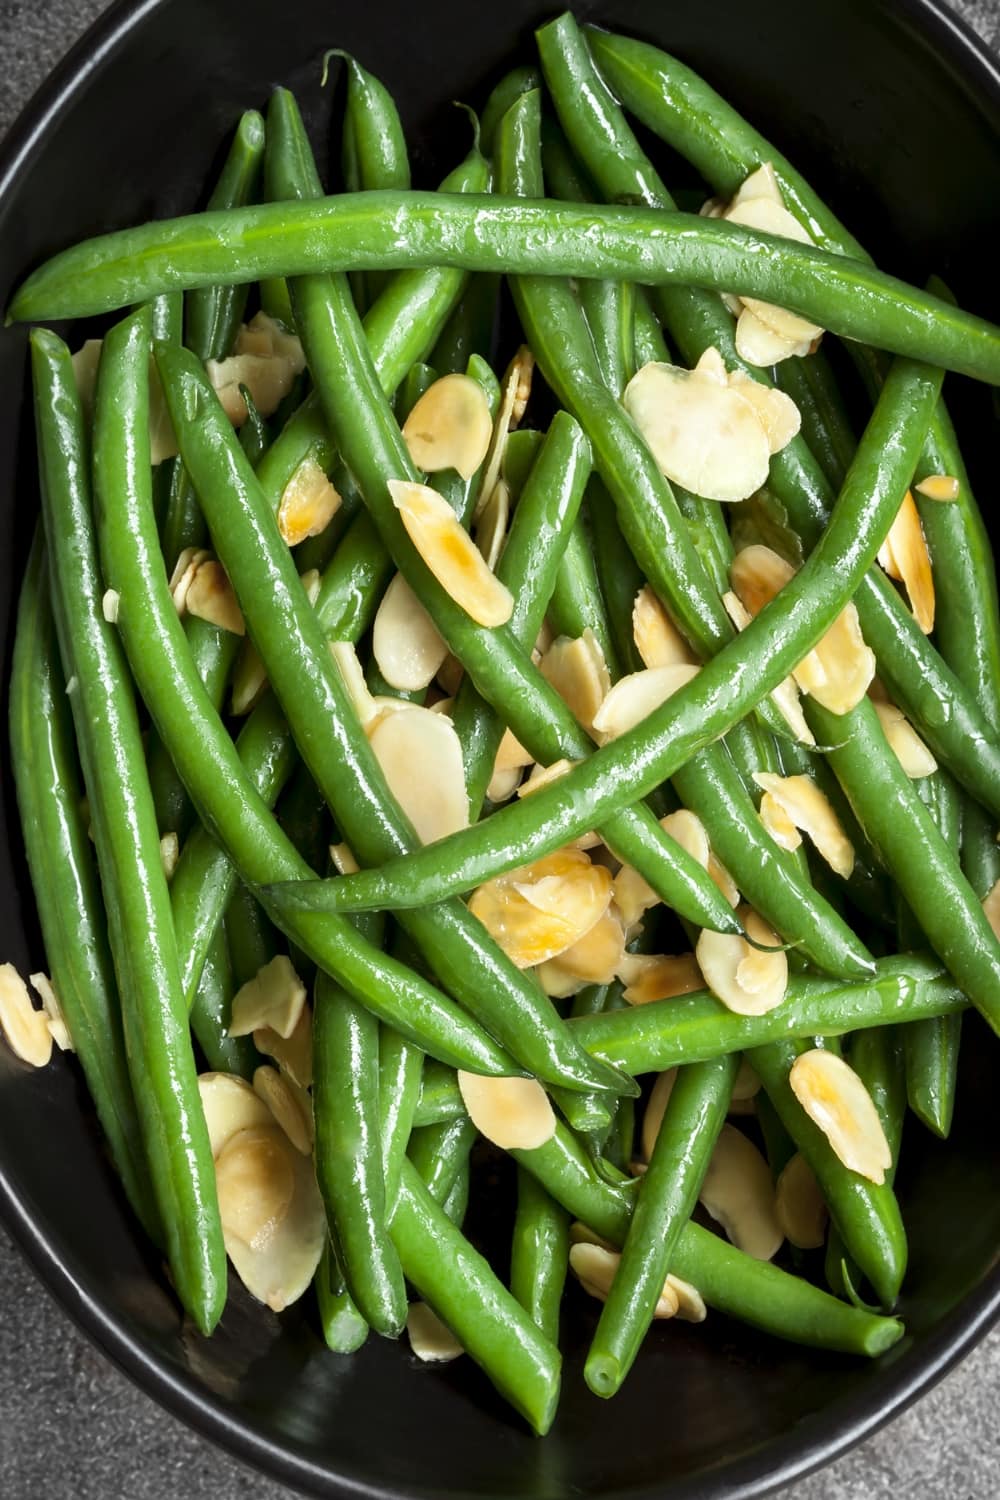 Green beans in a bowl with sliced almond nuts.